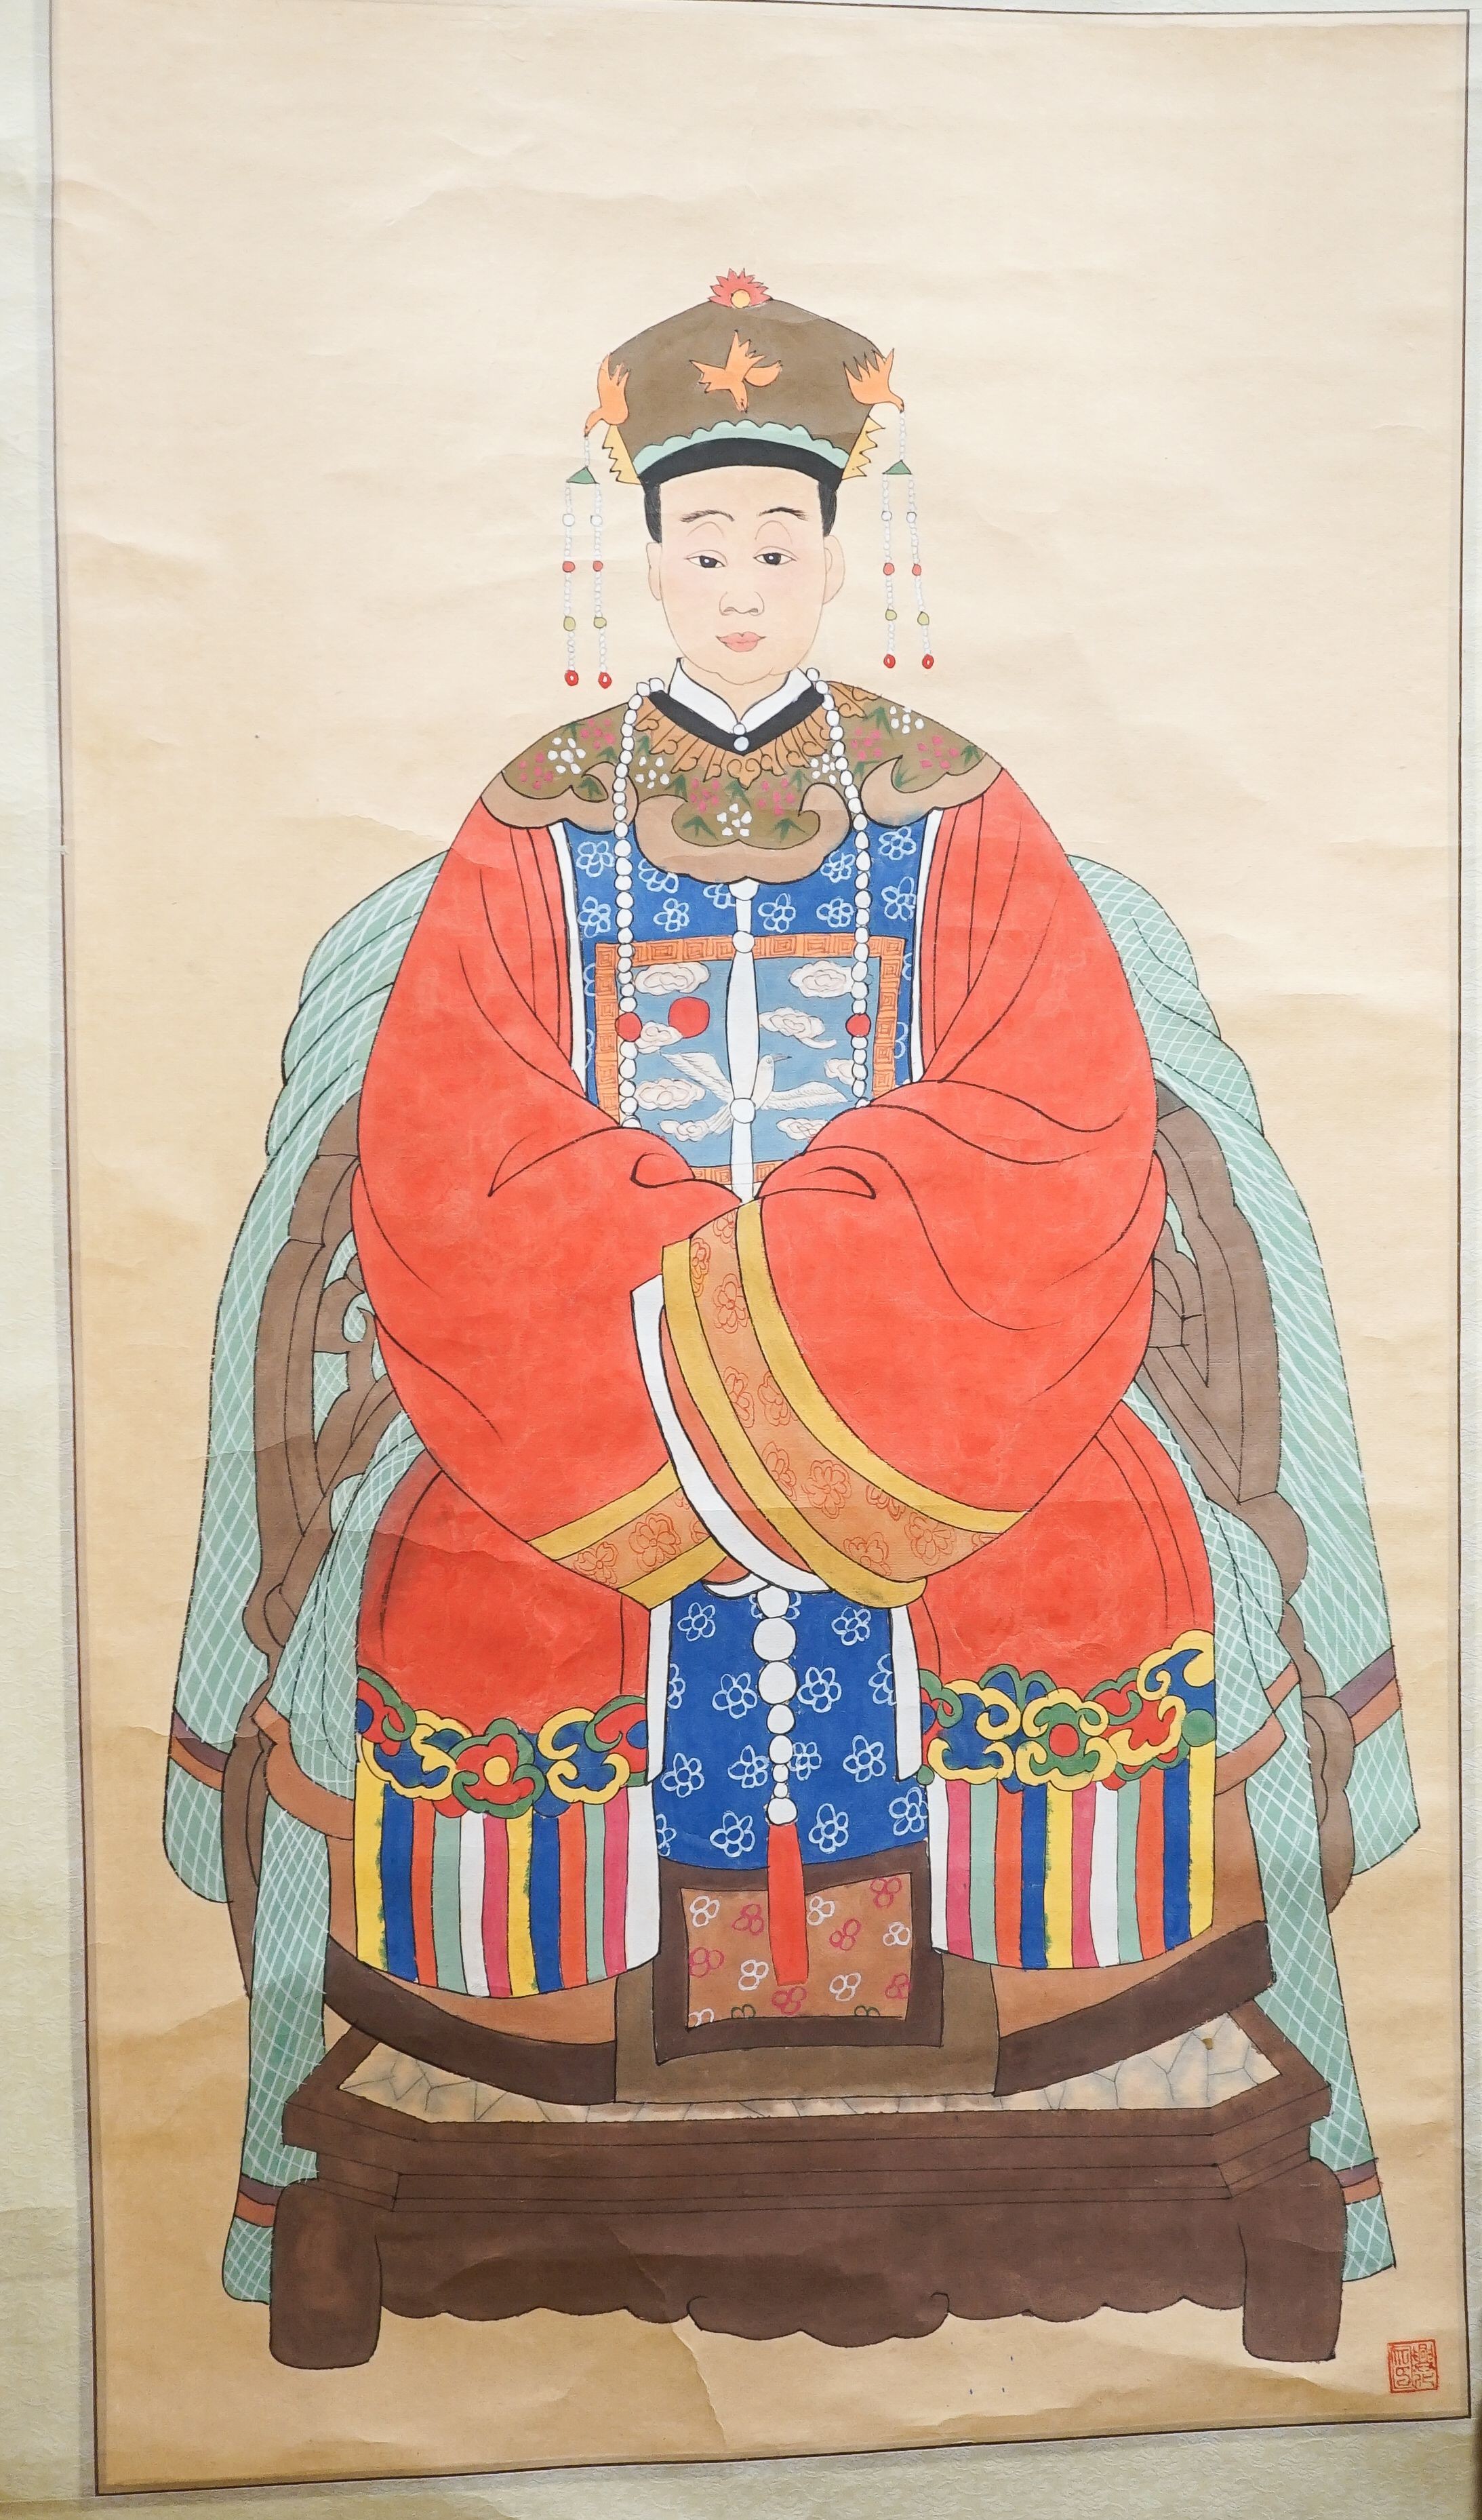 A painted wall hanging, Chinese dignitary